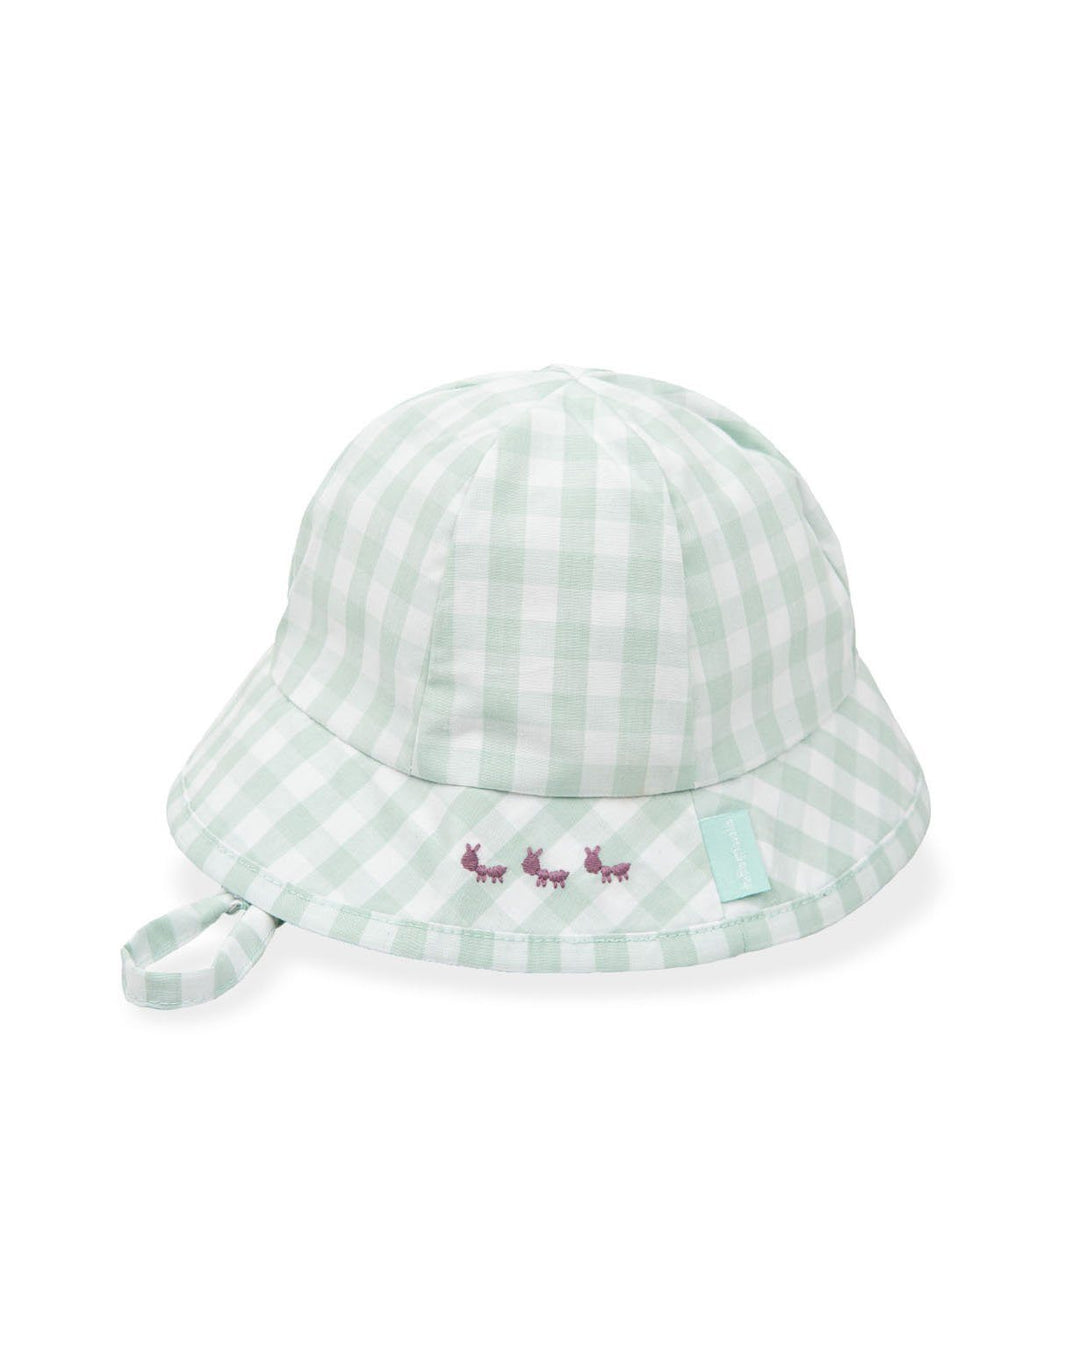 Tutto Piccolo Sage Green Gingham Sun Hat | Millie and John